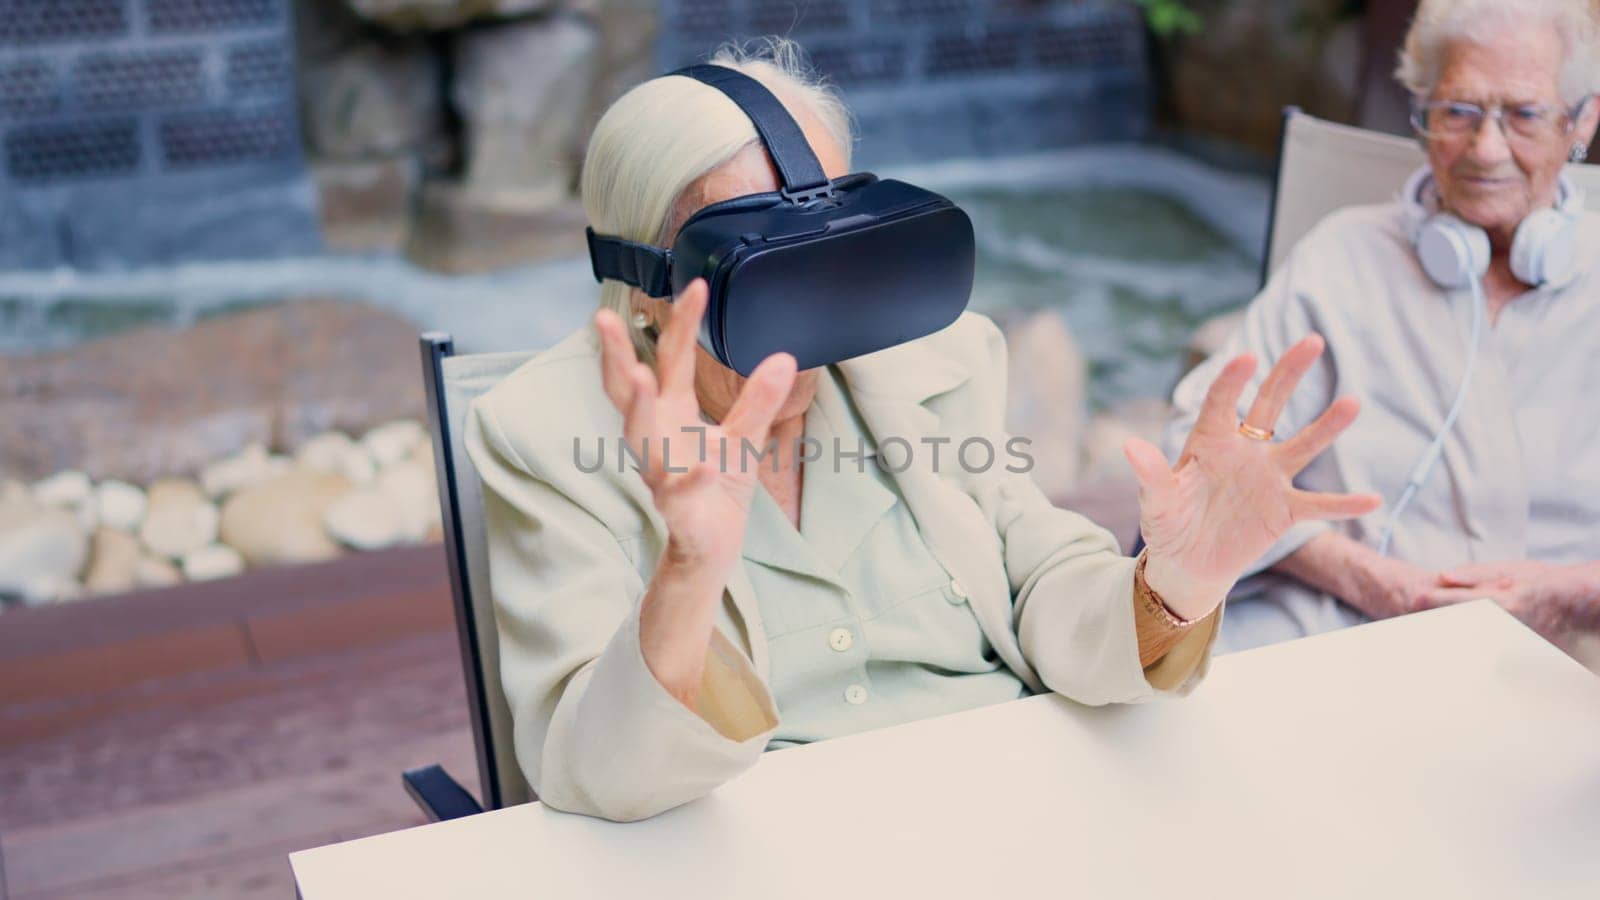 Picture of a senior woman gesturing while using virtual reality goggle in geriatric